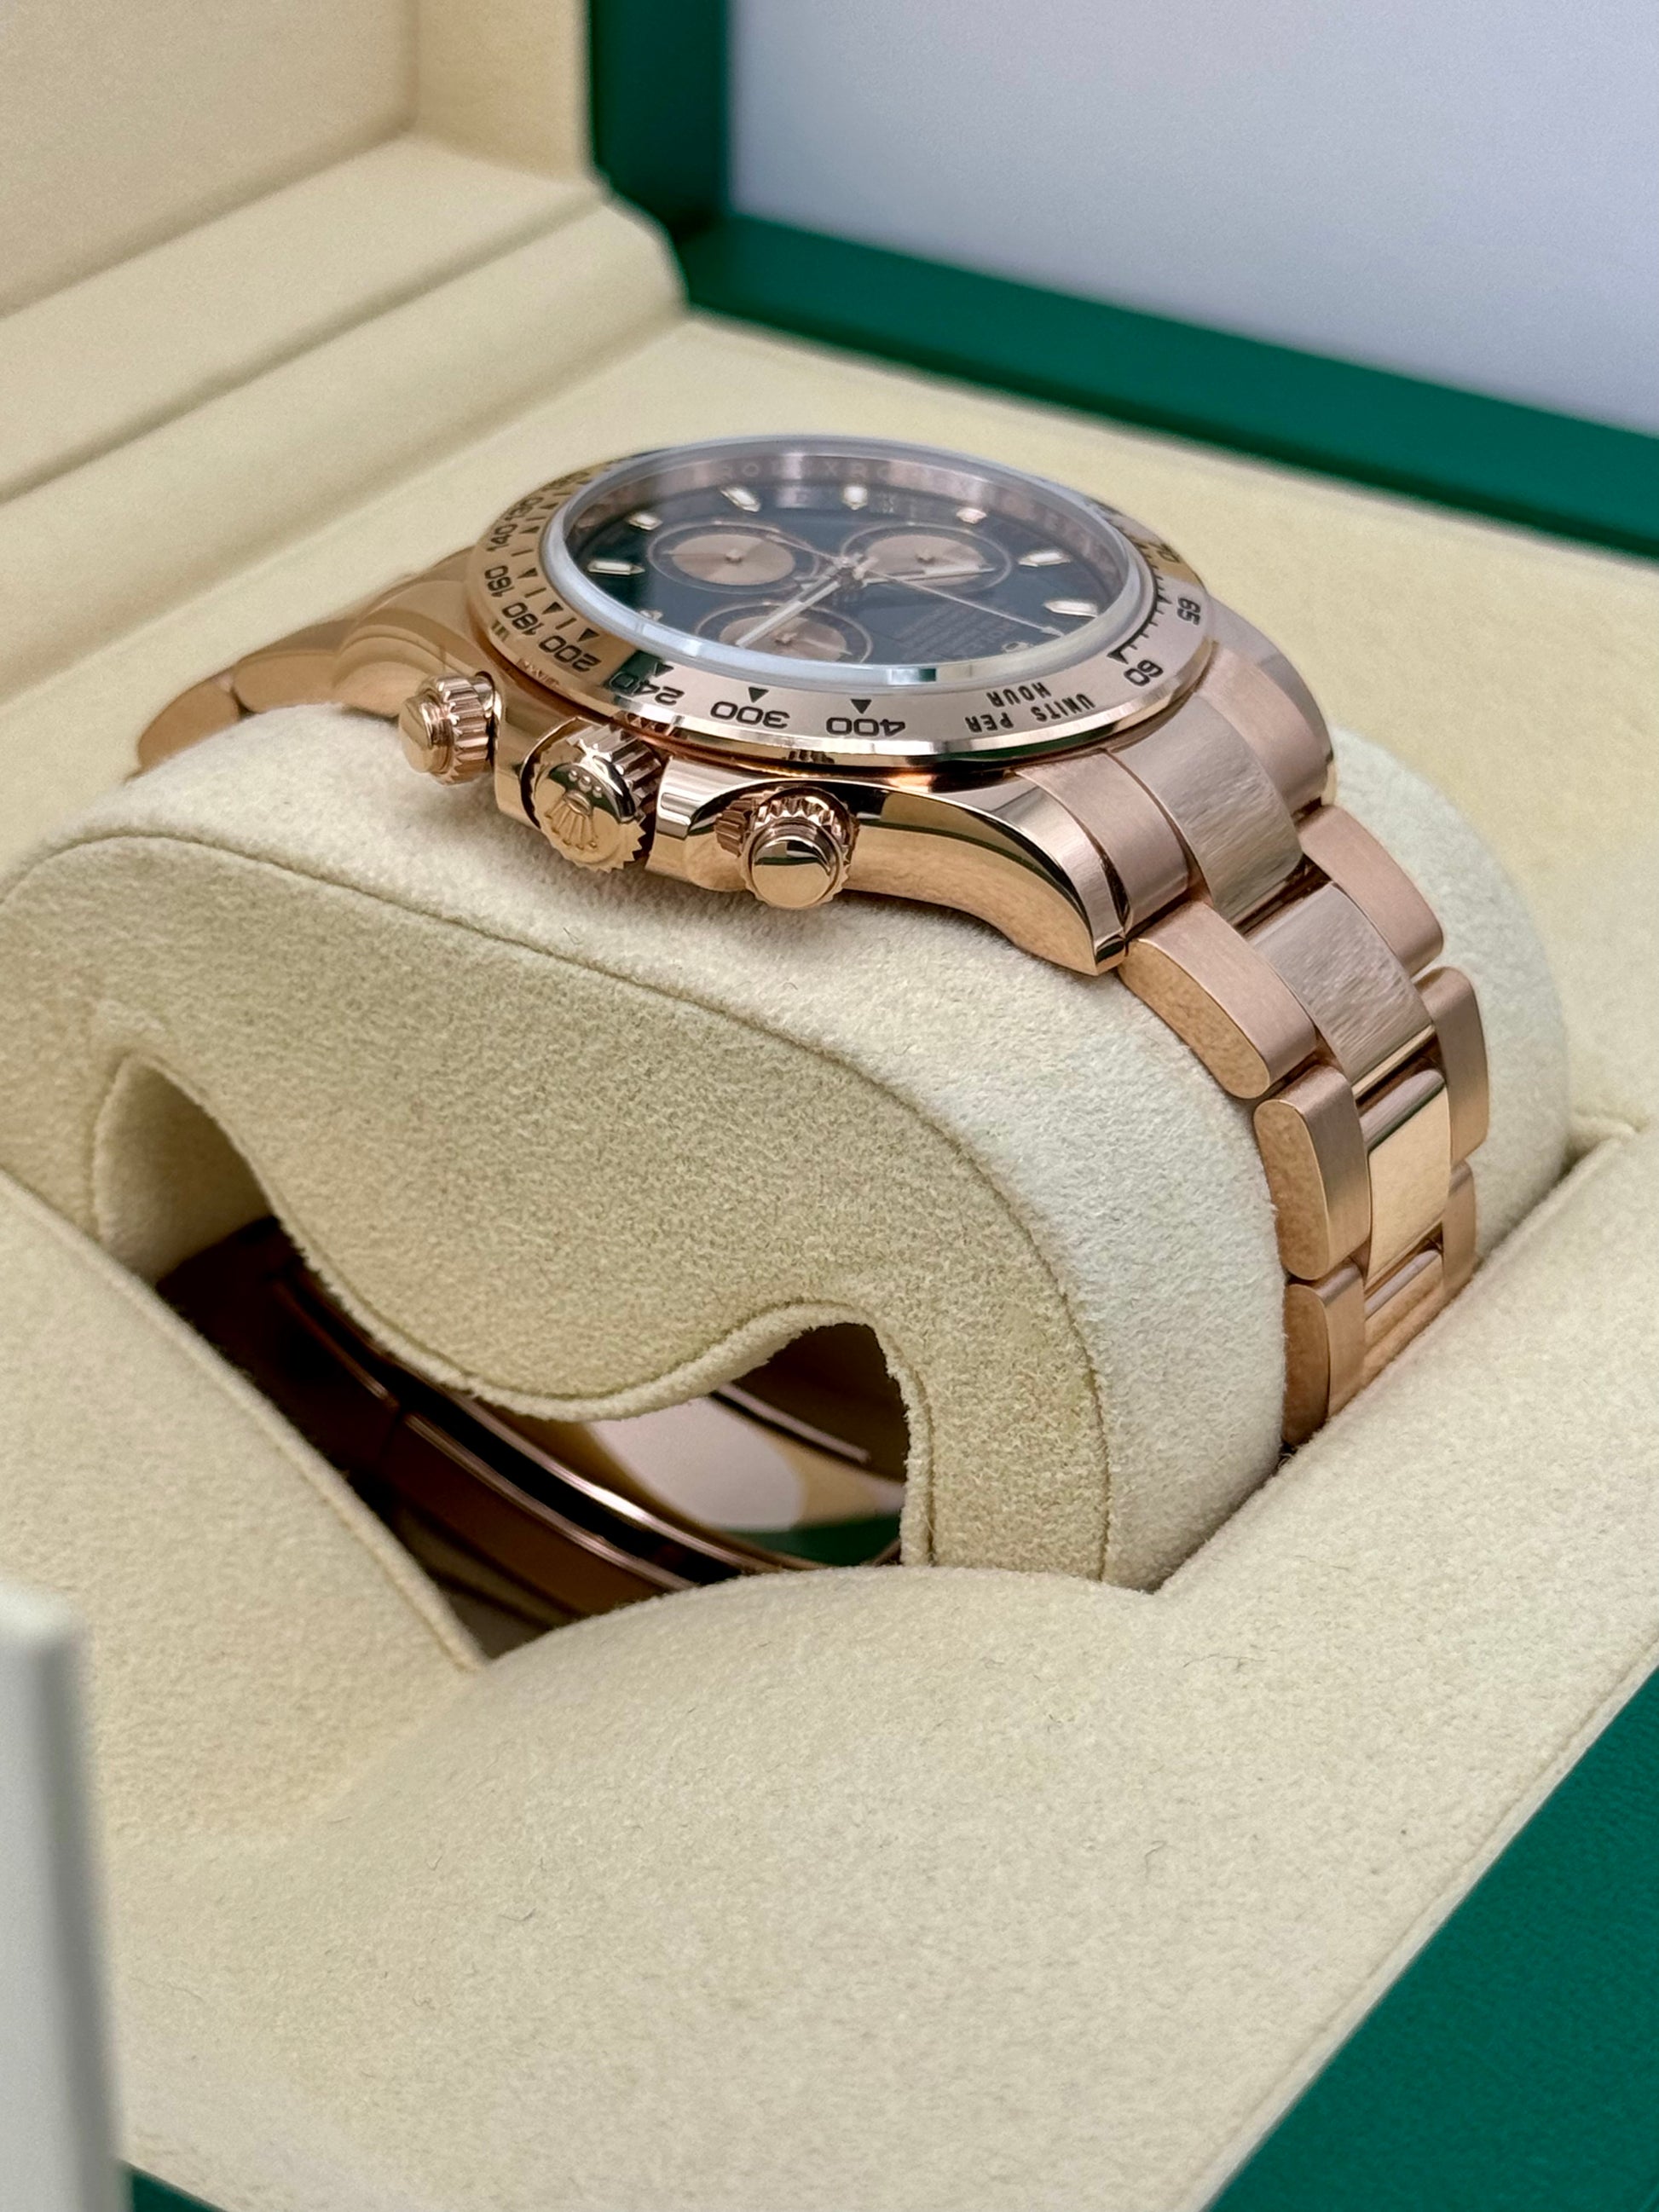 2020 Rolex Daytona Rose Gold 116505 Black and Sundust Dial - MyWatchLLC